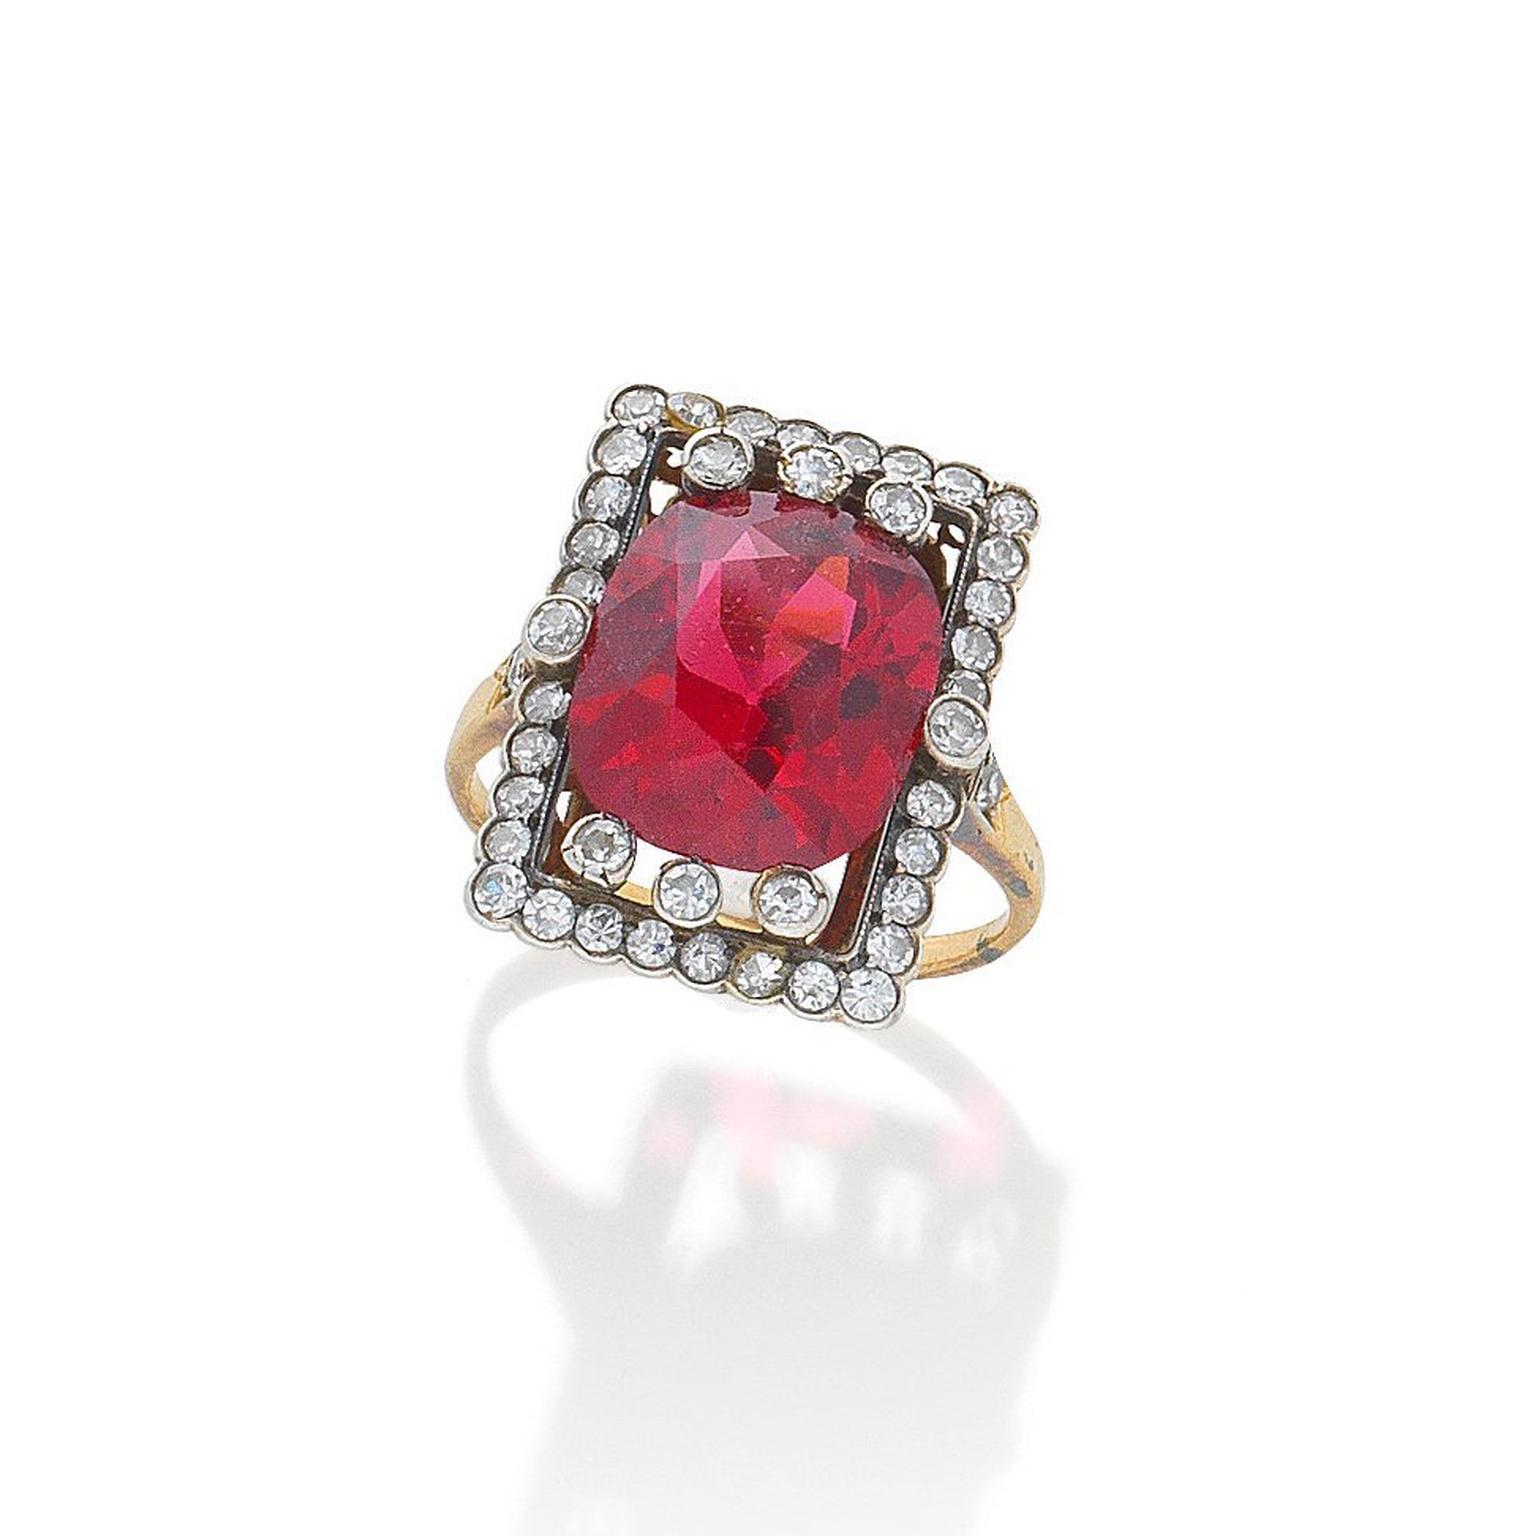 A spinel and diamond ring, circa 1890 auctionned by Bonhams - Lot 26